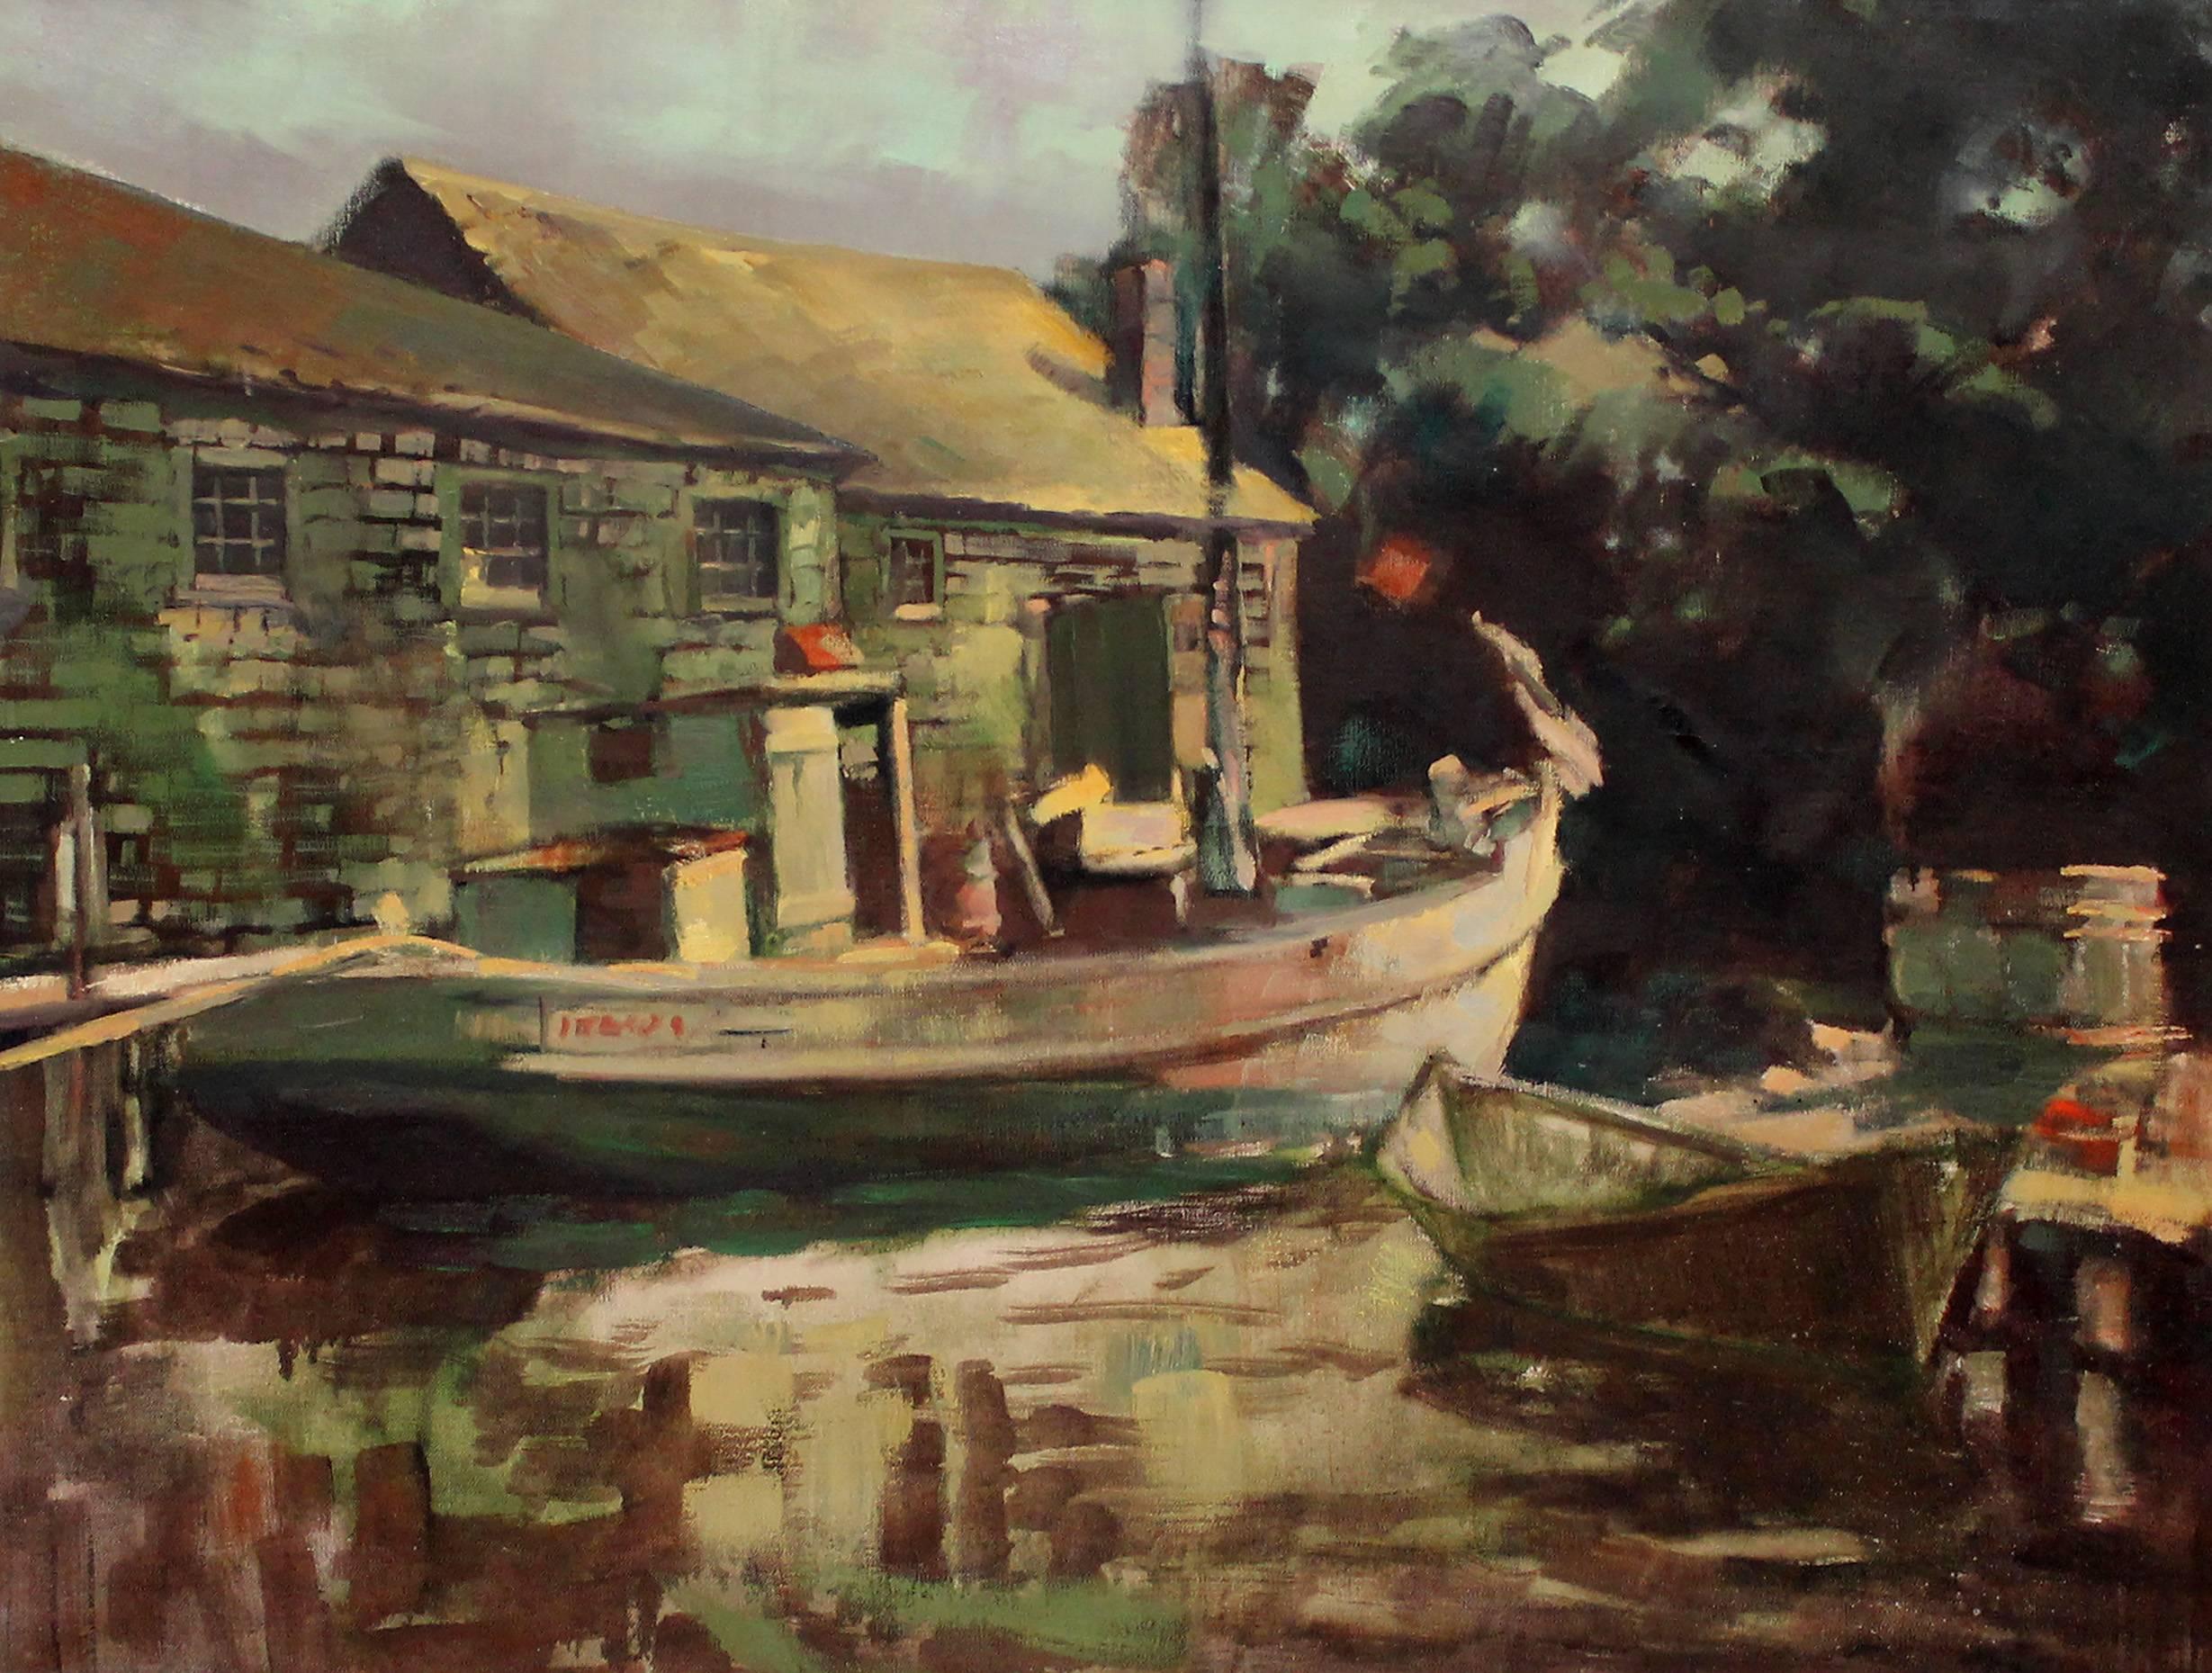 Docked Boat - Painting by Unknown